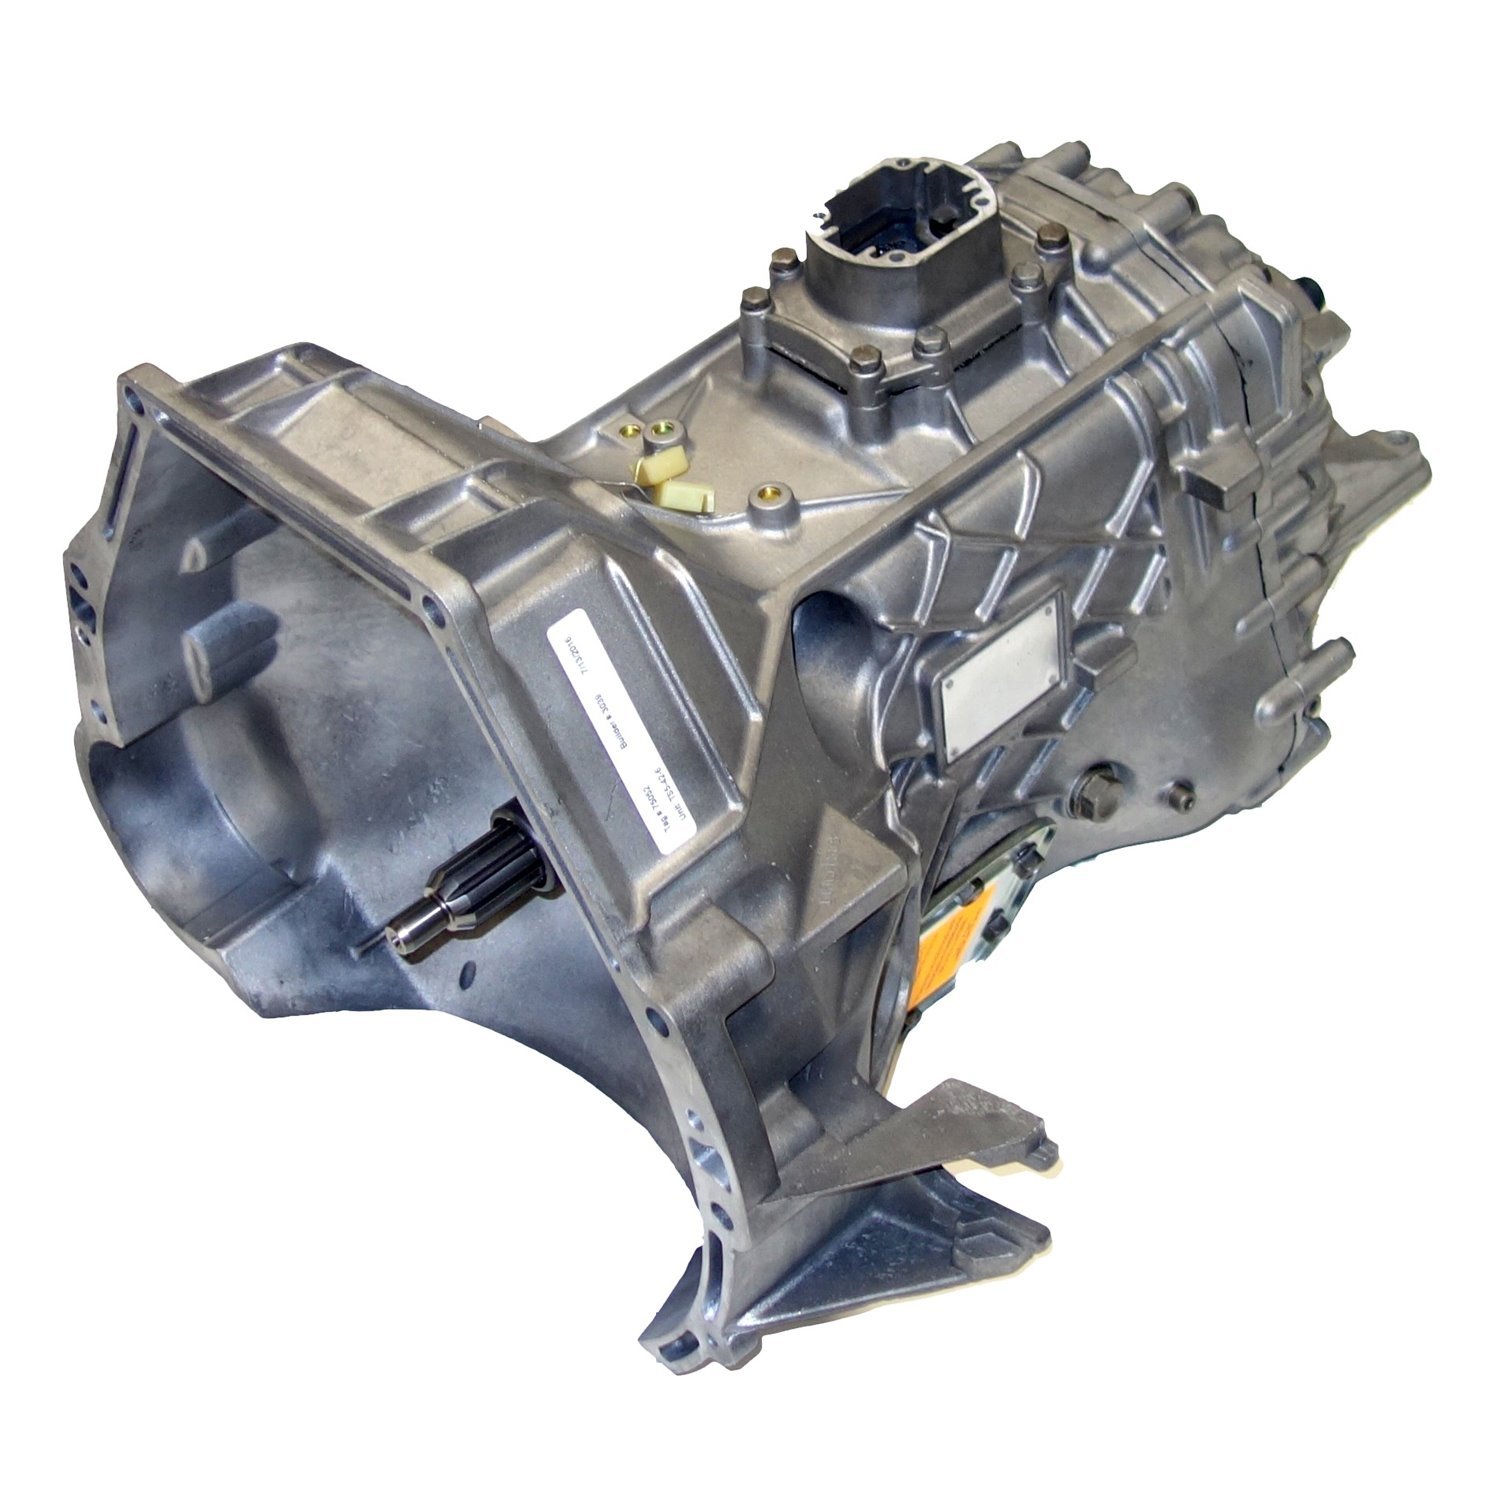 Remanufactured S5-42 Manual Transmission for Ford 87-92 F-series 7.5L, 2WD, 5 Speed, 8 Tooth